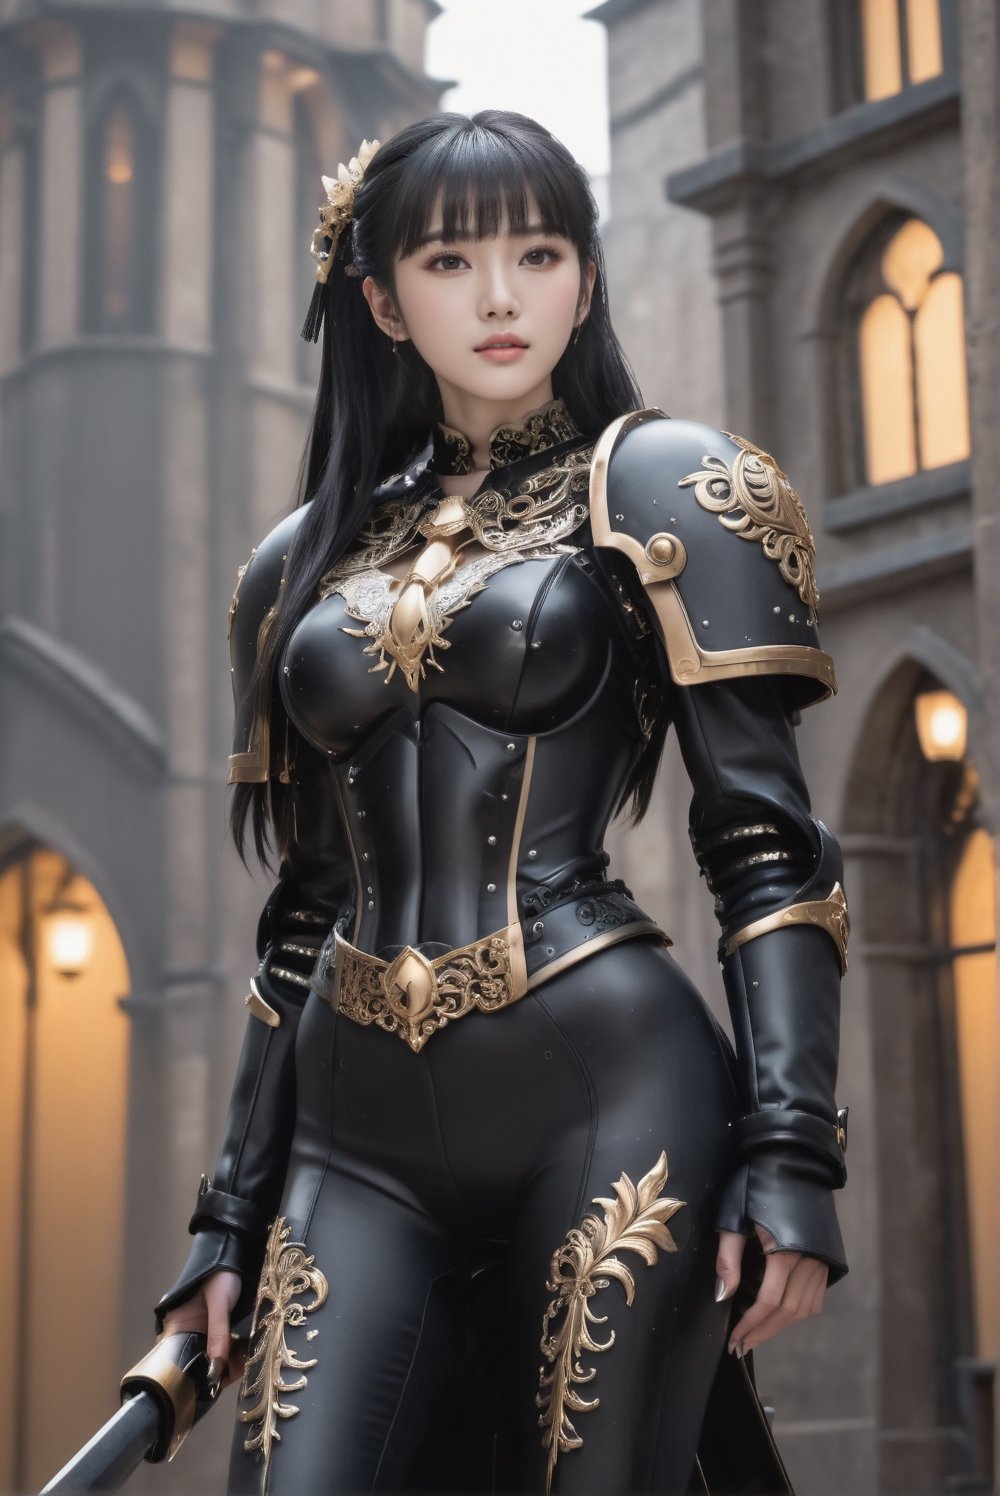 (full body shot: 1.25). A girl wearing black heavy armor in the ornate gothic style, pauldron, metallic collar, knight armor, golden filigree, miniskirt, black leggings, ((platform high heel):1.25). A 17-years-old ethereal breathtakingly glamorous japanese girl, black hair, long pony tail, slim and tall perfect model body, beautiful long legs, An ethereal beautiful face with v-shaped jawline, bright eyes, almond-shaped eyes, translucent skin texture, porcelain skin tone. award-winning, hyperrealistic:1.2, hd 8k, high resolution, holding bolt, perfect detail, intricate detail, raw photo, photo_b00ster